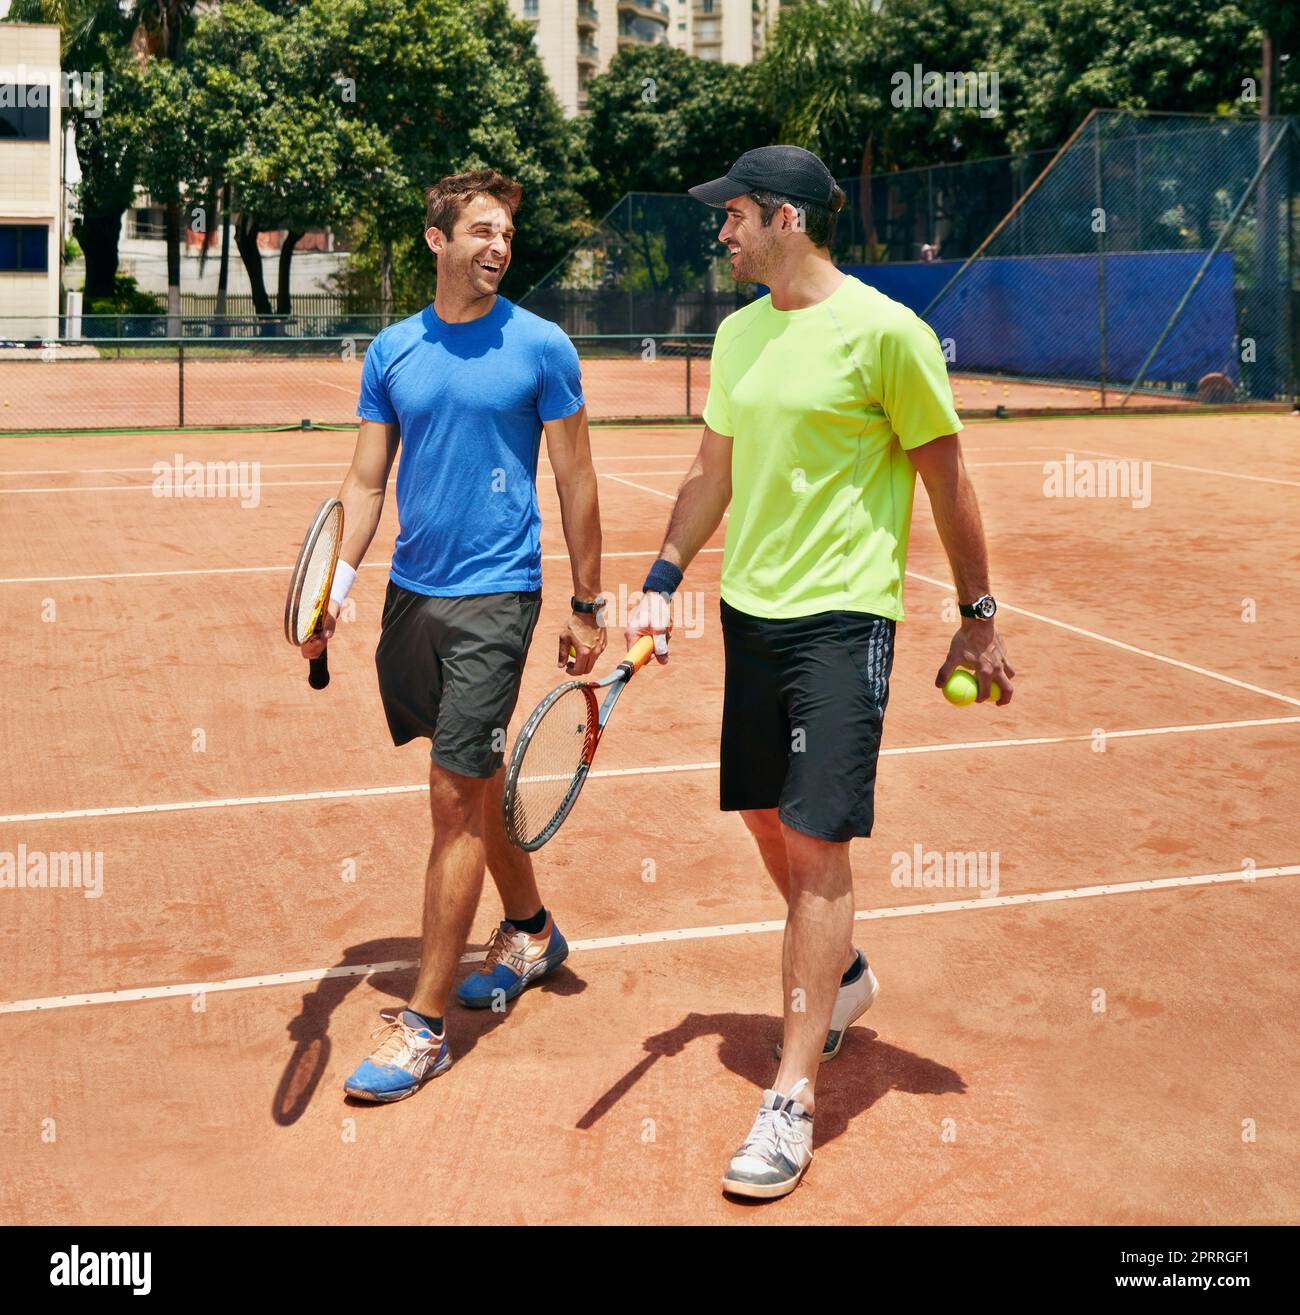 Keeping it friendly. two tennis players talking on the court after a friendly game. Stock Photo